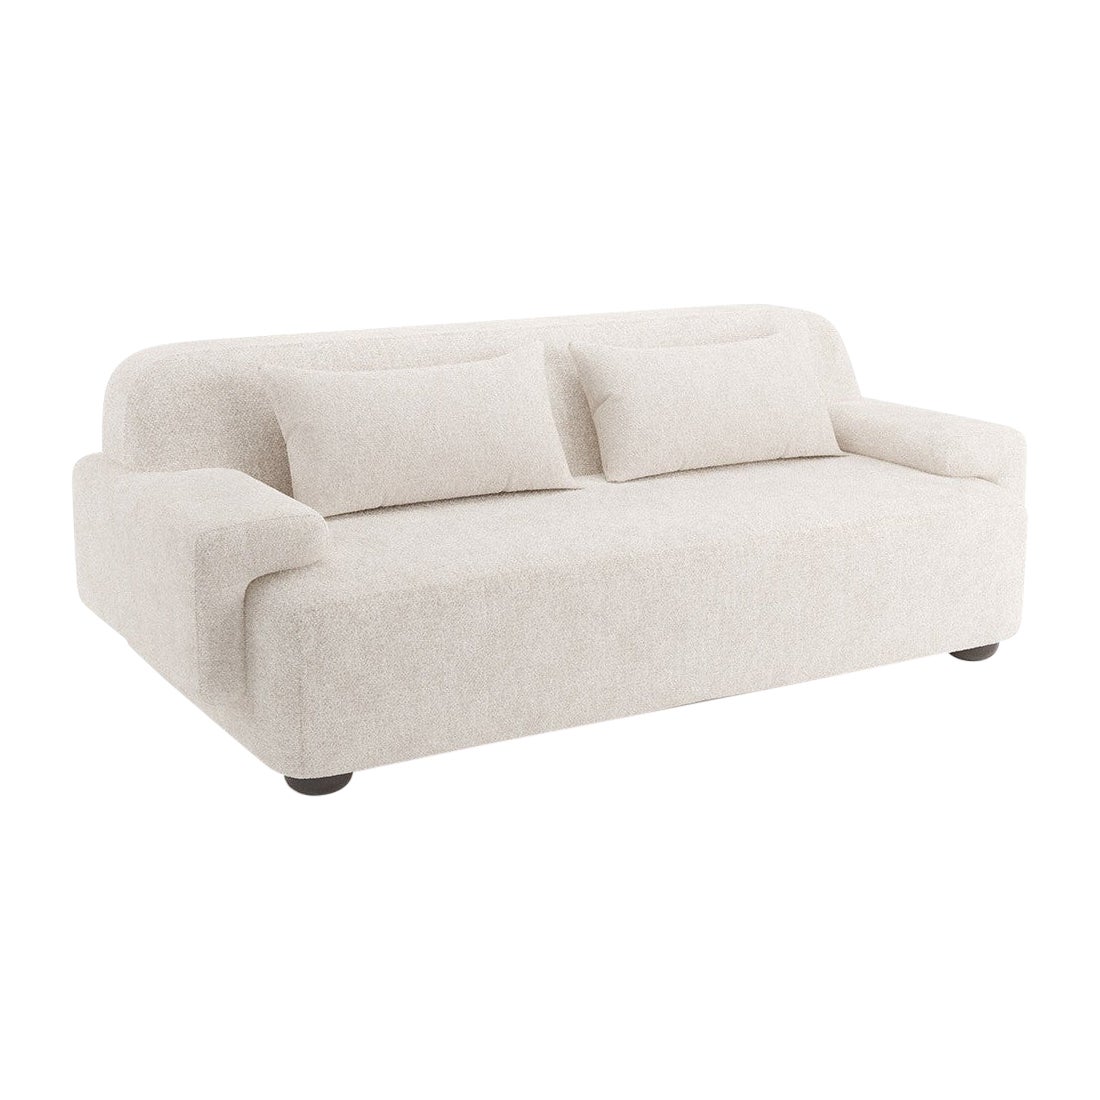 Popus Editions Lena 3 Seater Sofa in Gray Antwerp Linen Upholstery